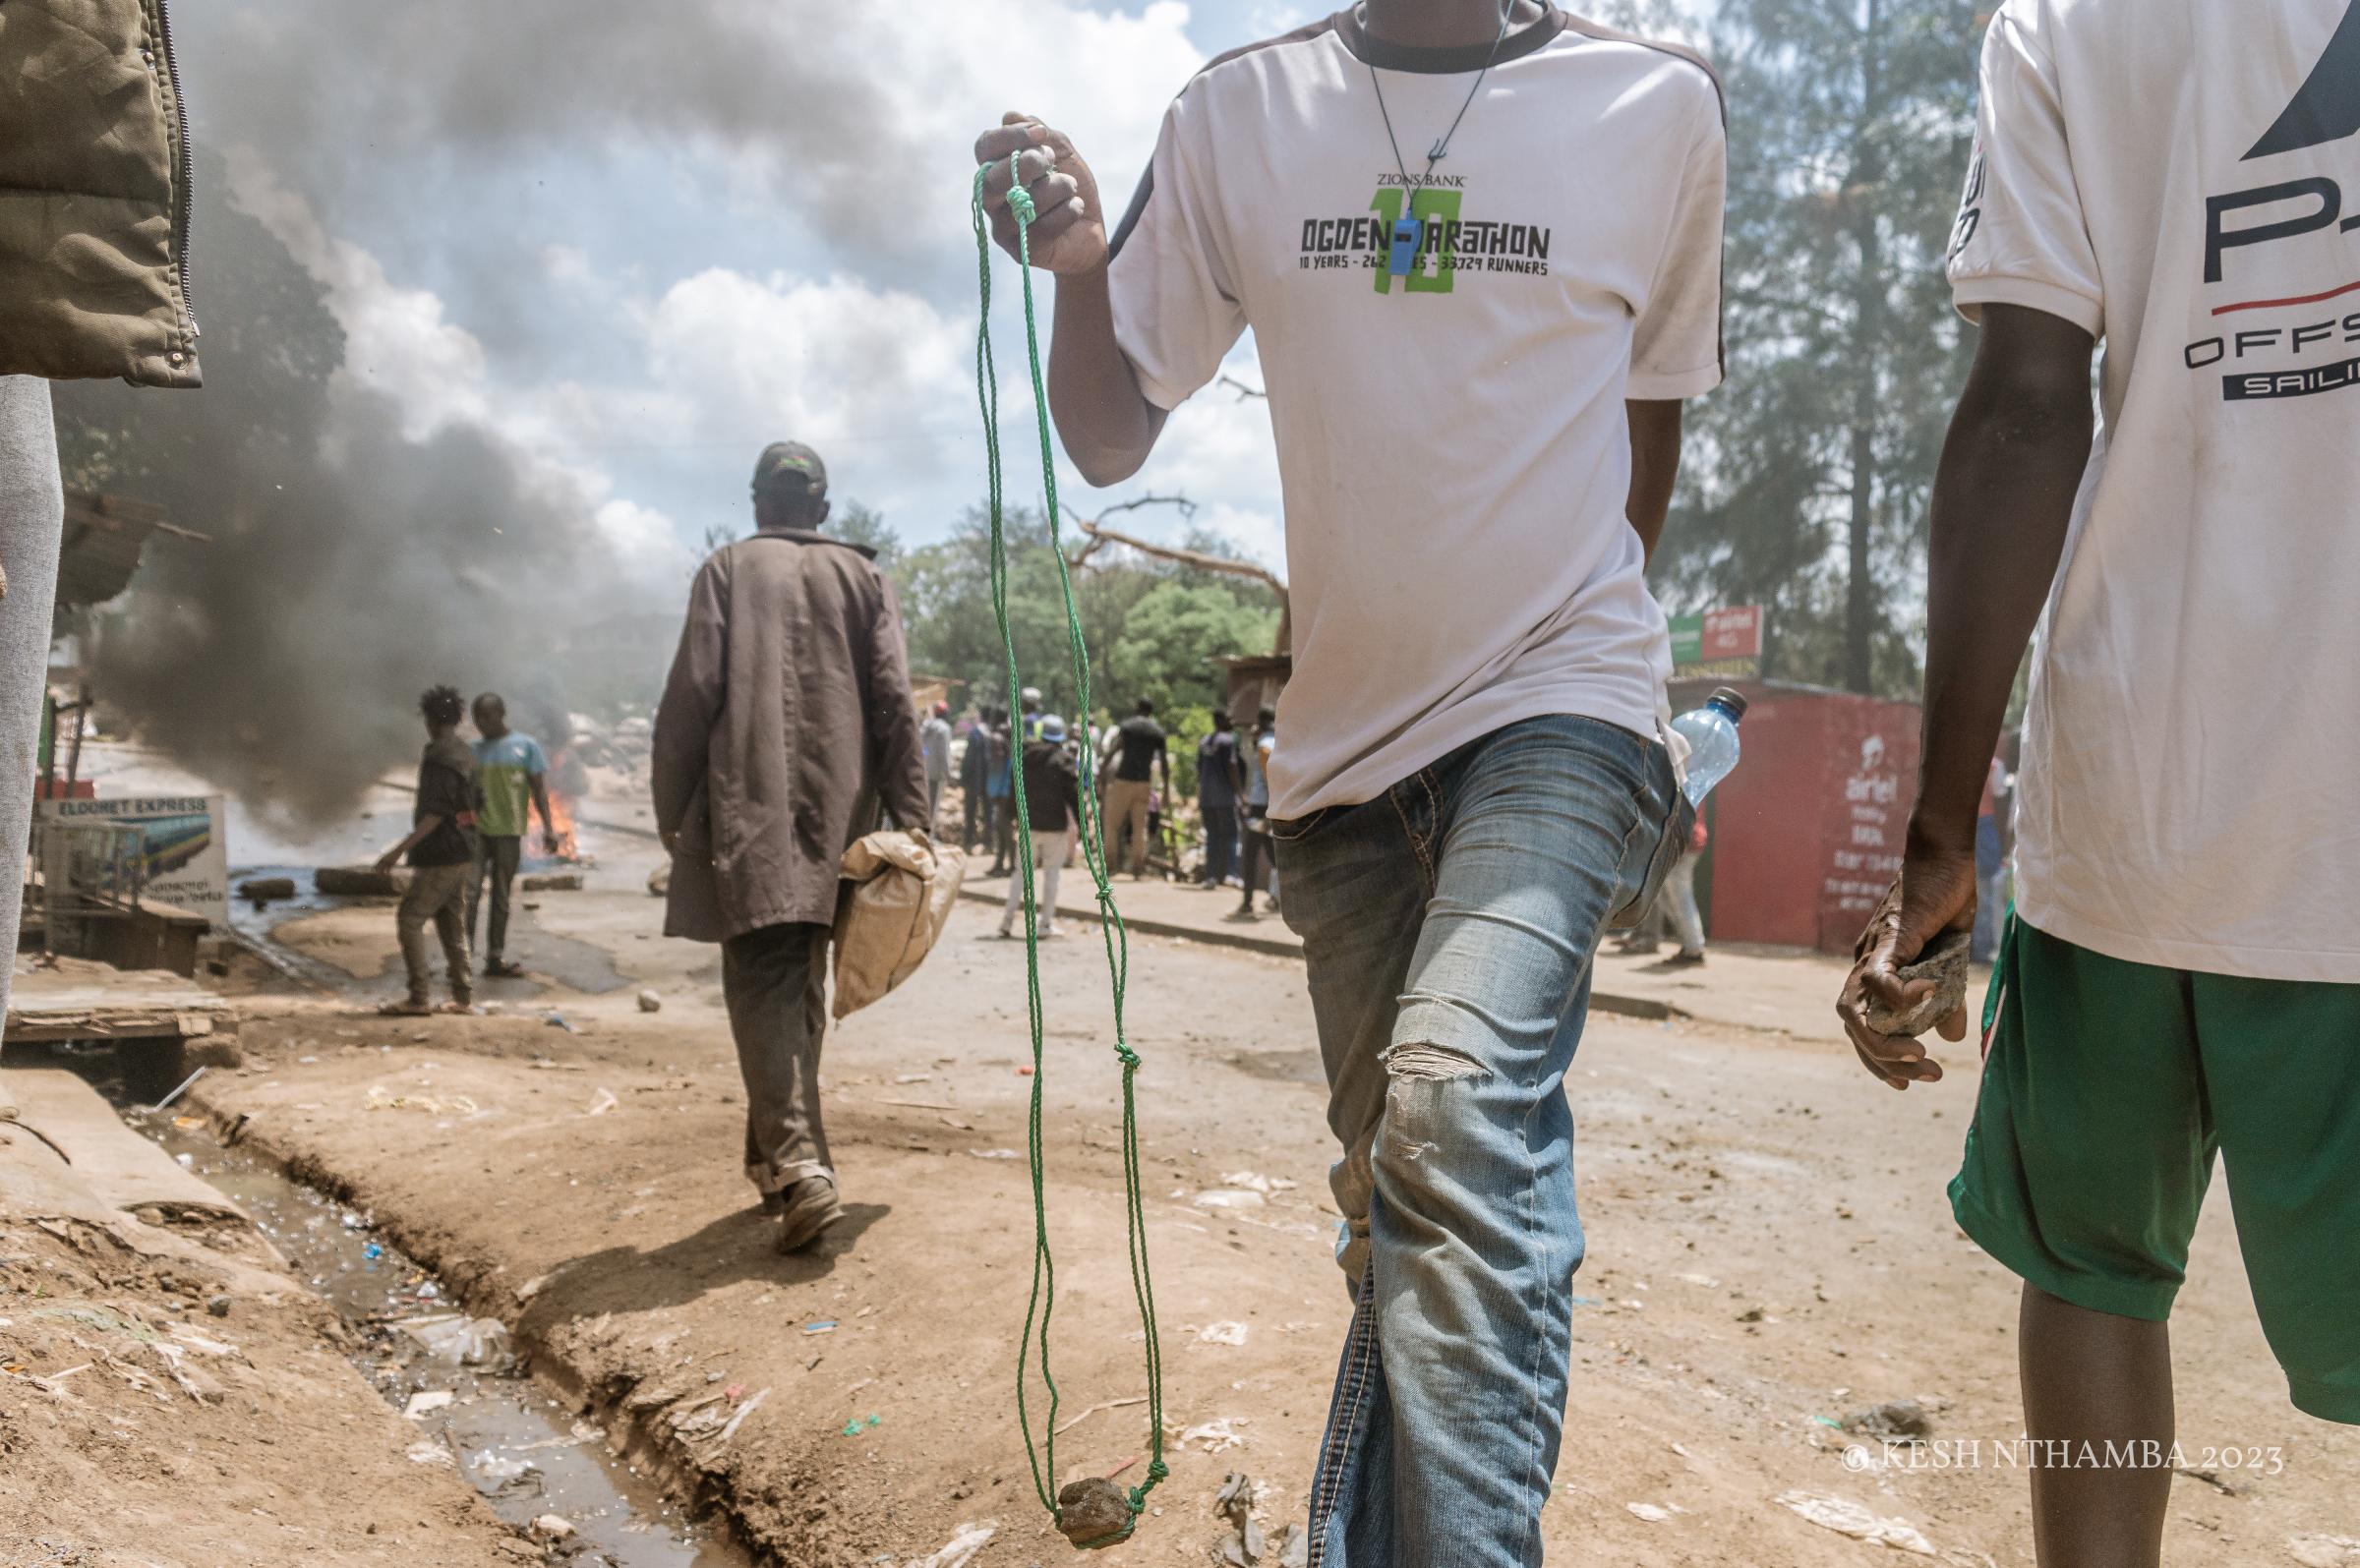 Anti-government Kibera Protests - A protestor carrys a sling during the anti-government...